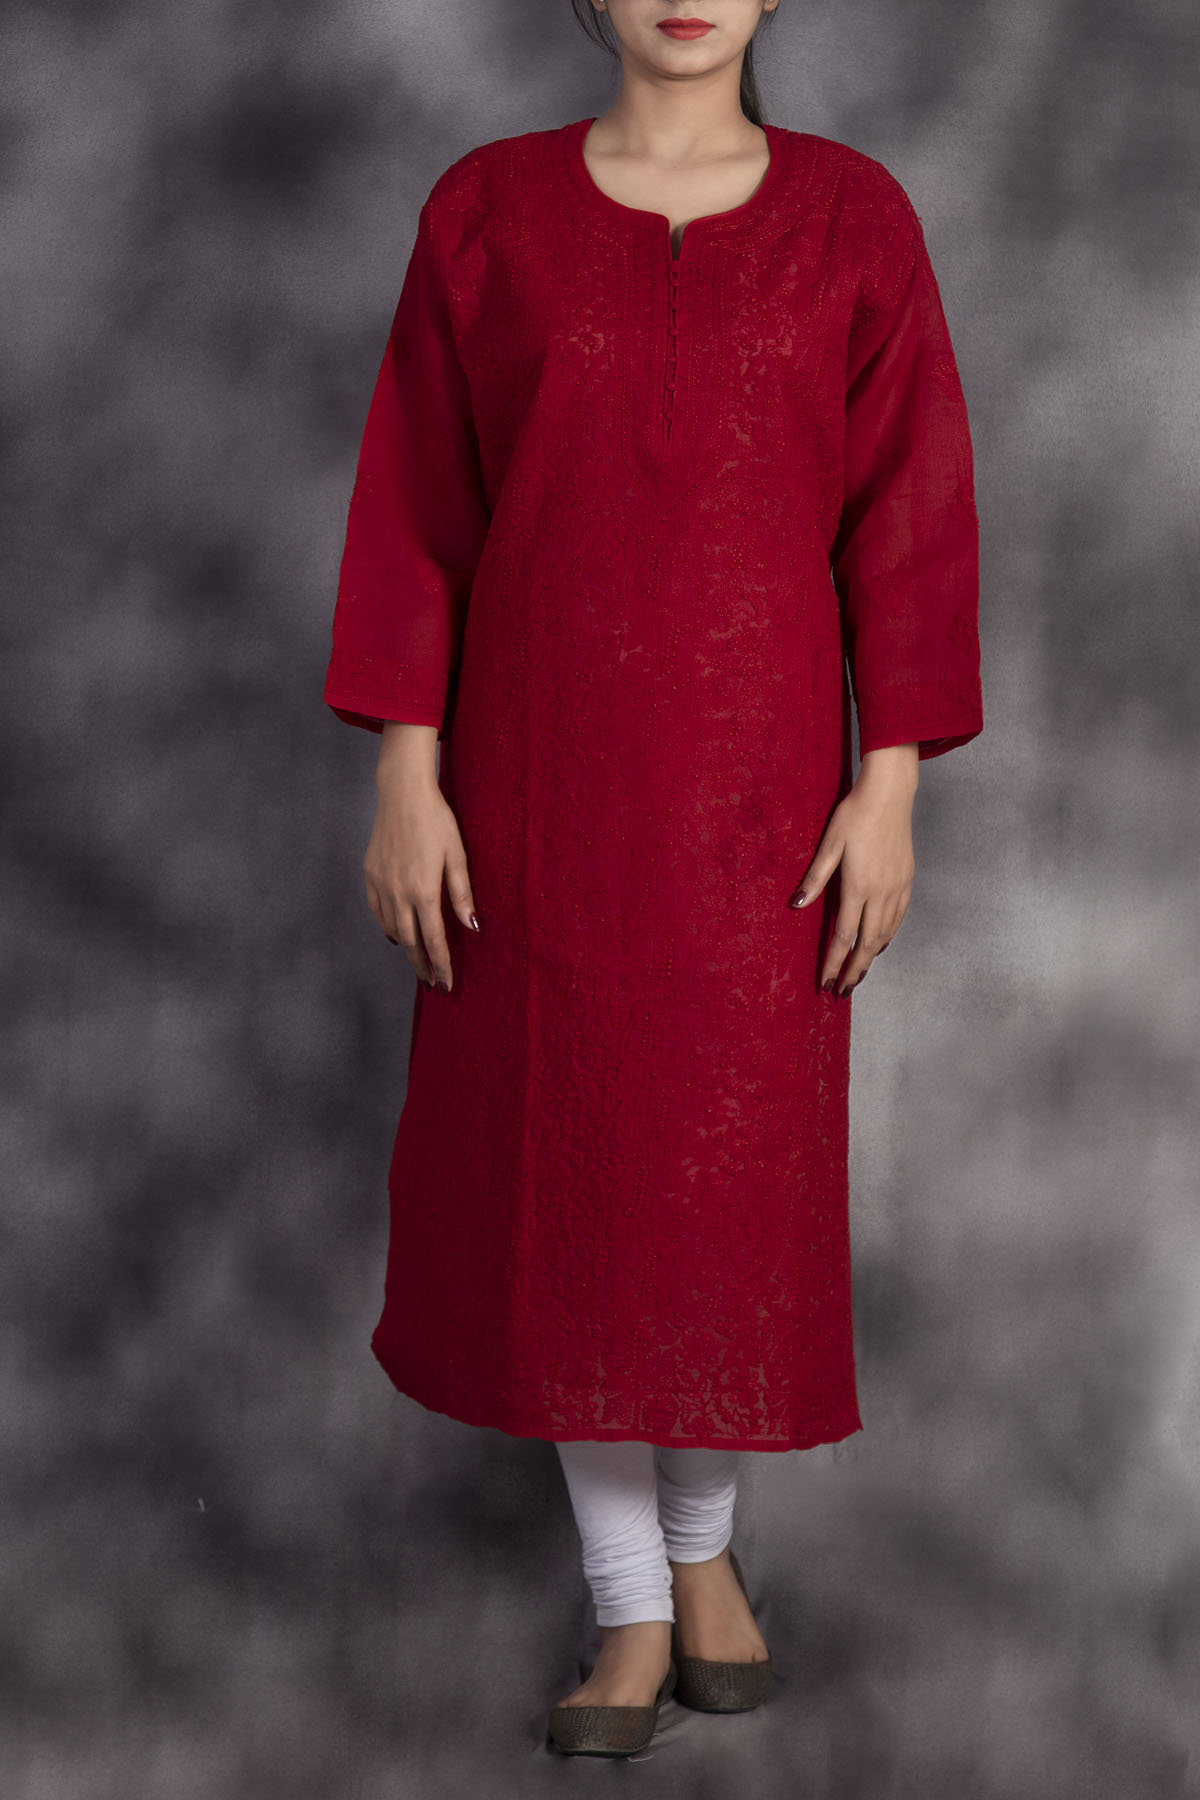 Buy Fashion Paradise Lucknowi ChikanKari Red Karachi Hand-embroidered  Ethnic Kurti Suitable for Most of the Occasions. at Amazon.in